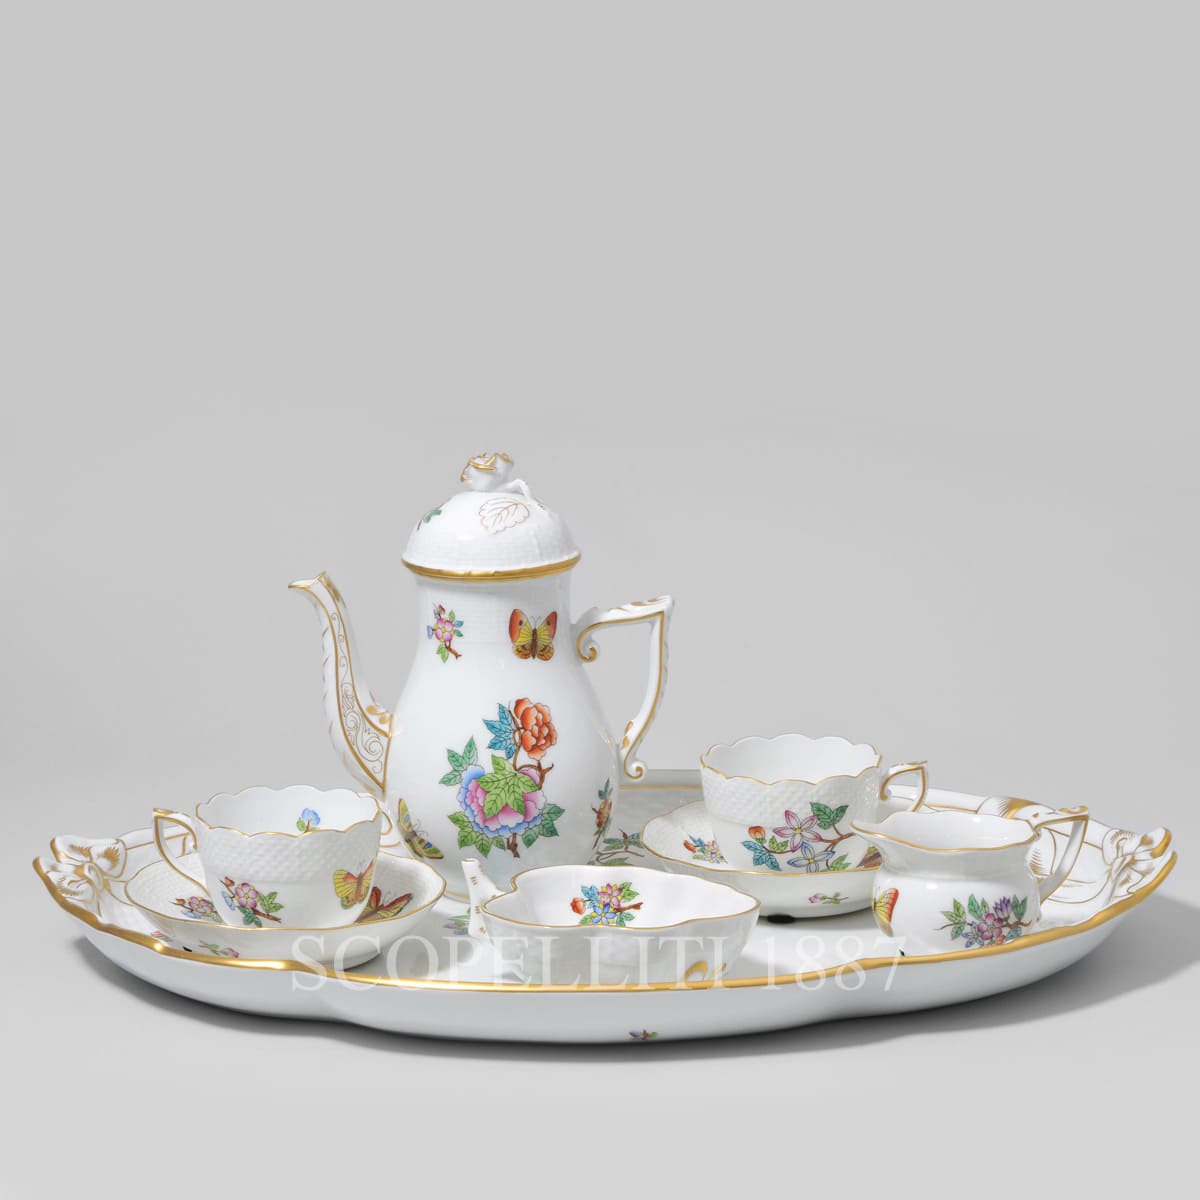 Queen Victoria - Coffee Set for 2 Persons - Herend Austria